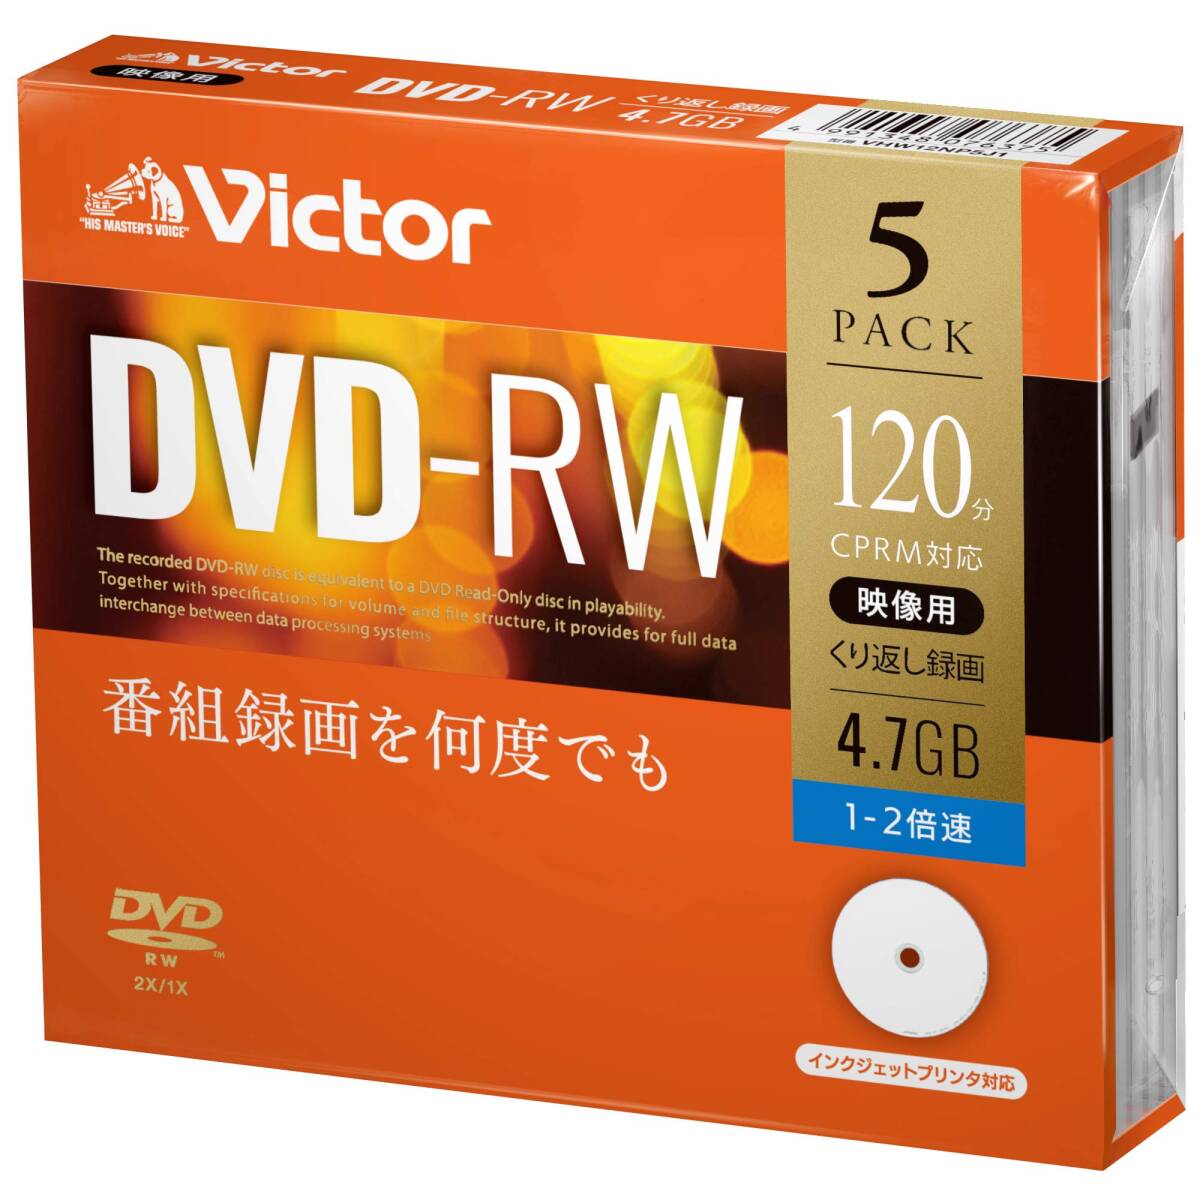  Victor (Victor).. return video recording for DVD-RW VHW12NP5J1 ( one side 1 layer /1-2 speed /5 sheets )